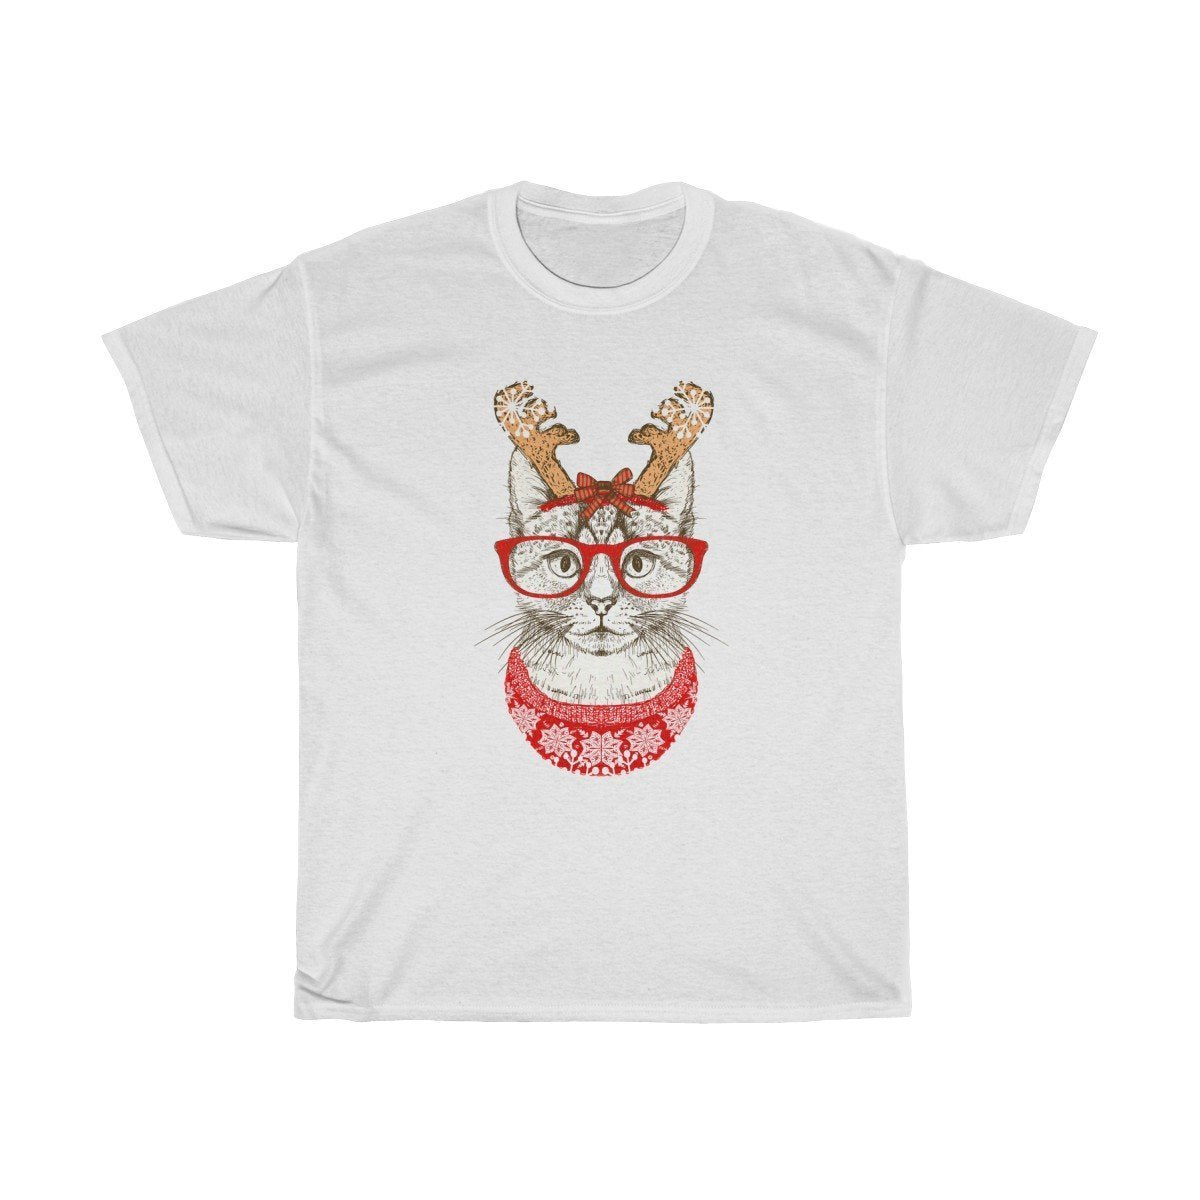 Cat Themed Gifts for Her, Christmas Cat Shirt Decorated with a Cat Wearing Glasses and Antlers